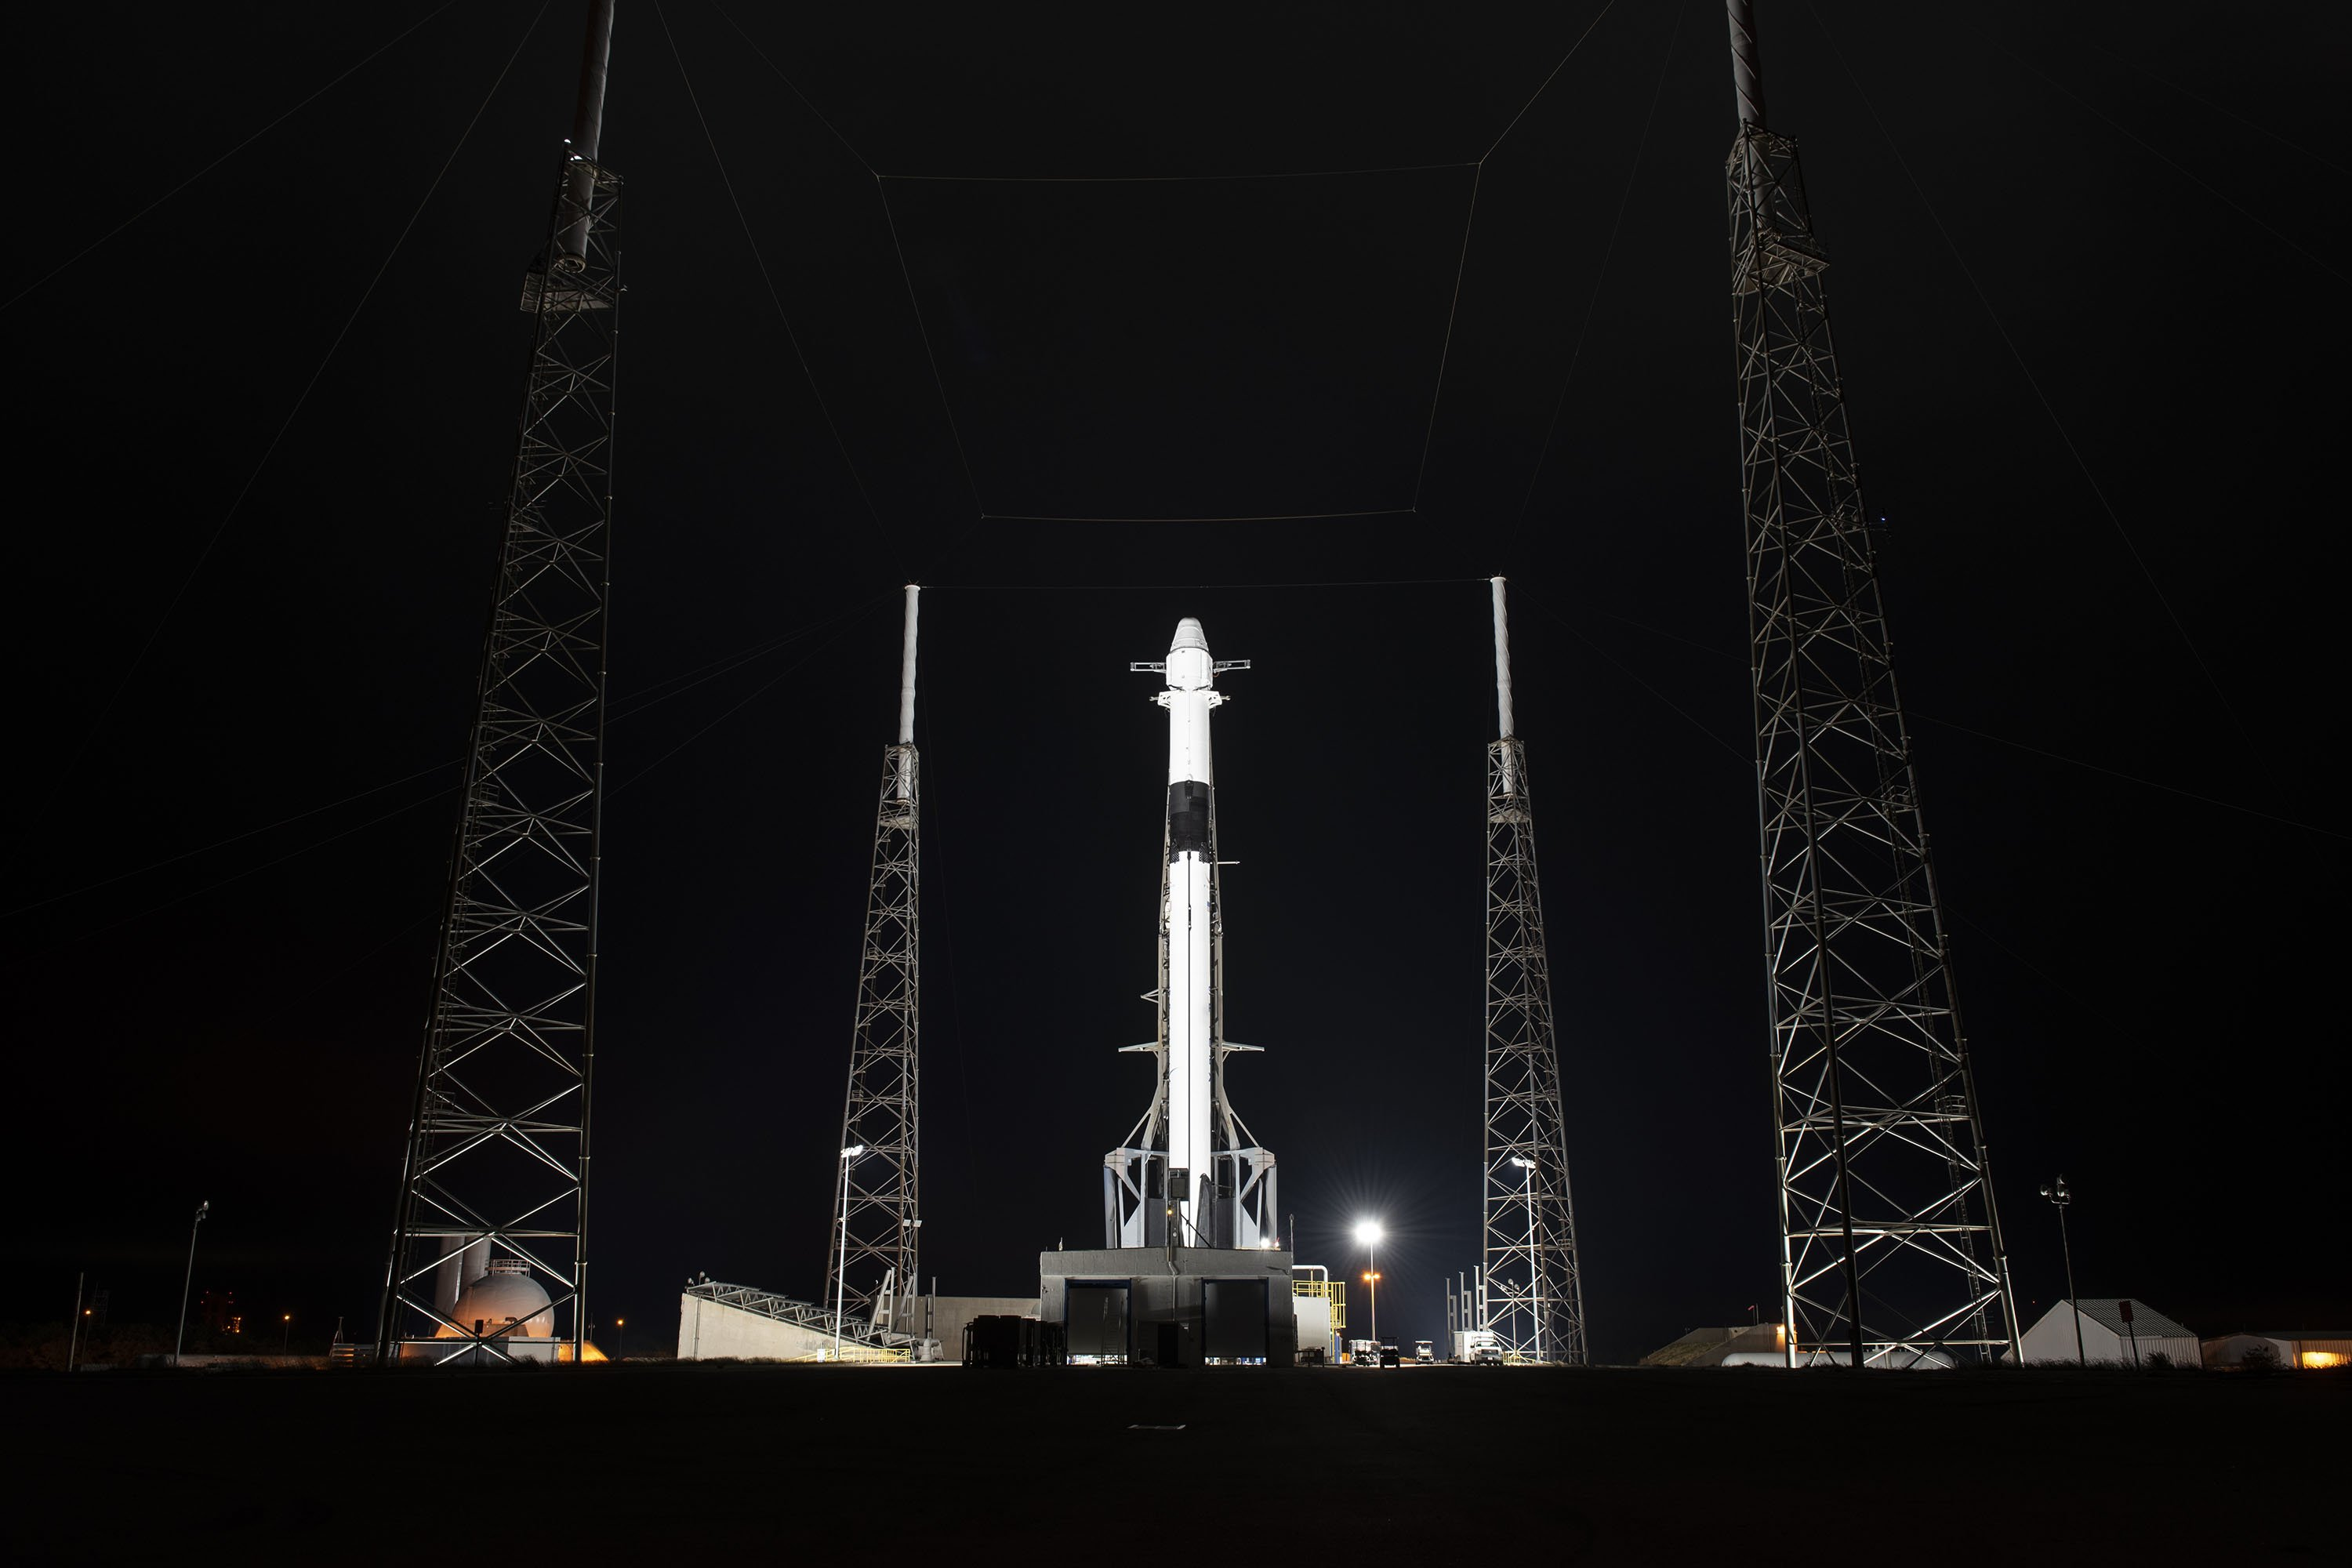 Spacex Launch Site / SpaceX expects Texas site to launch humans to the